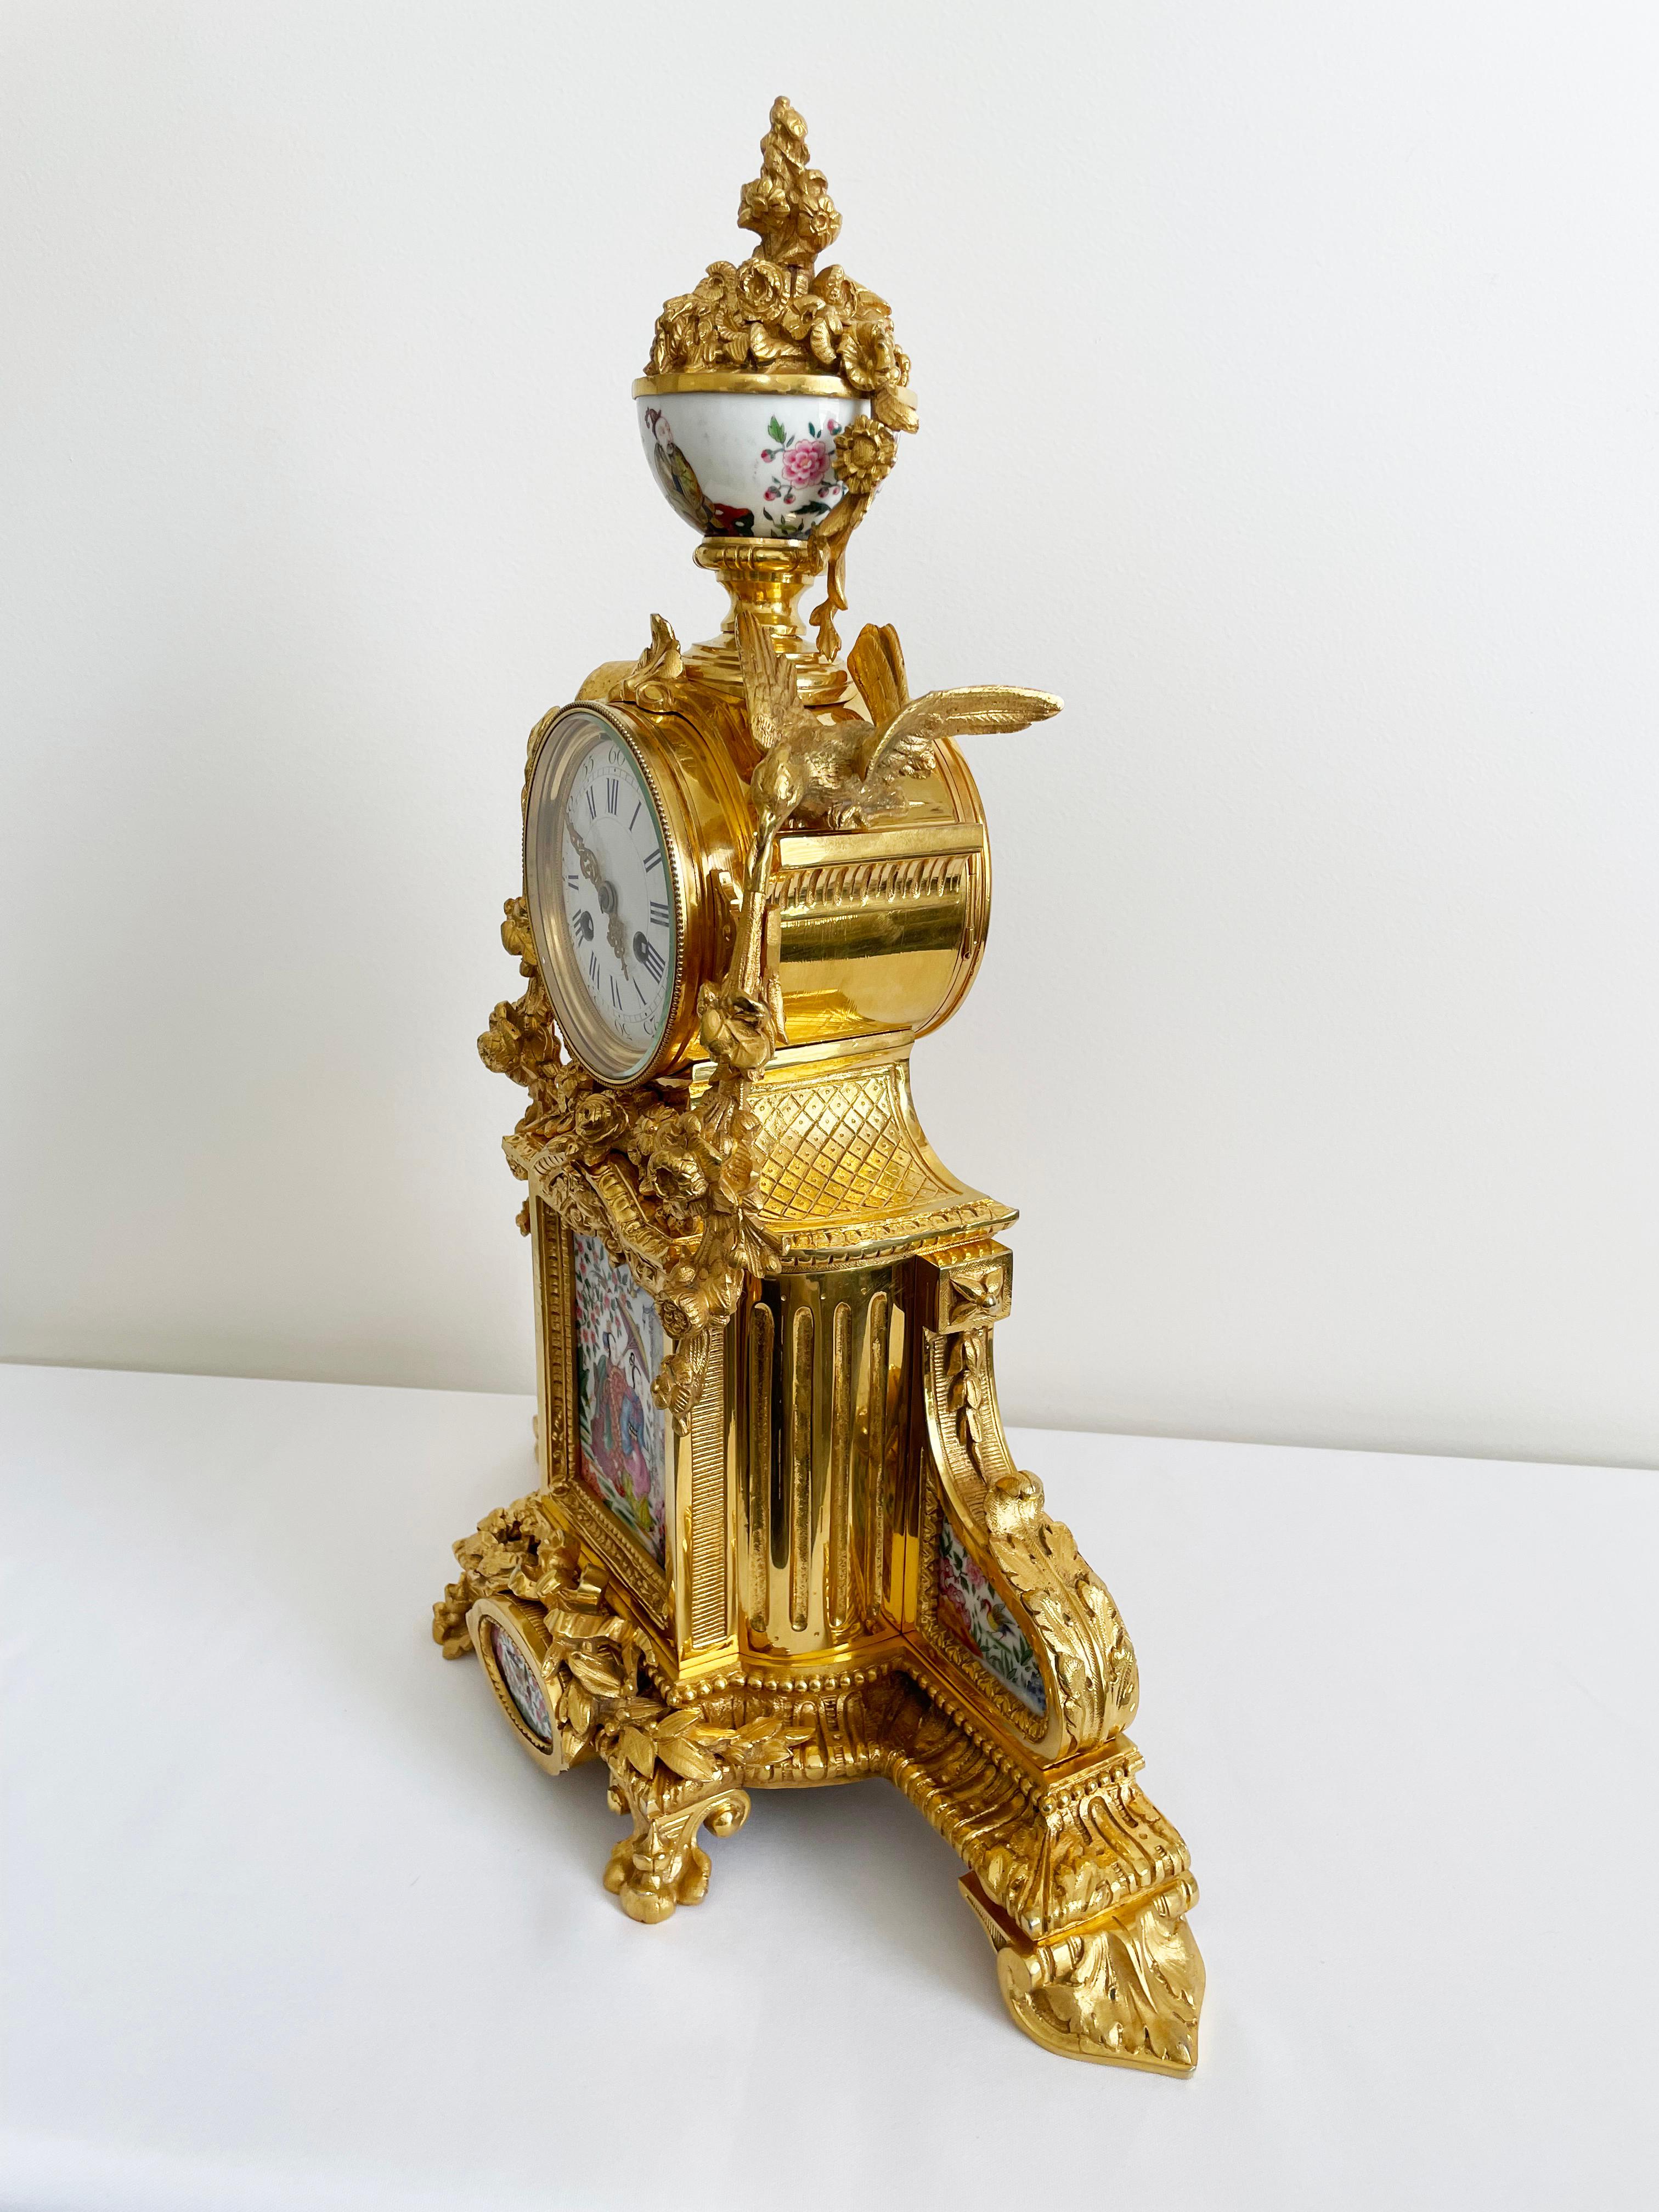 French Gilt Bronze And Porcelain Chinoiserie Themed Mantel Clock, 19th Century For Sale 11